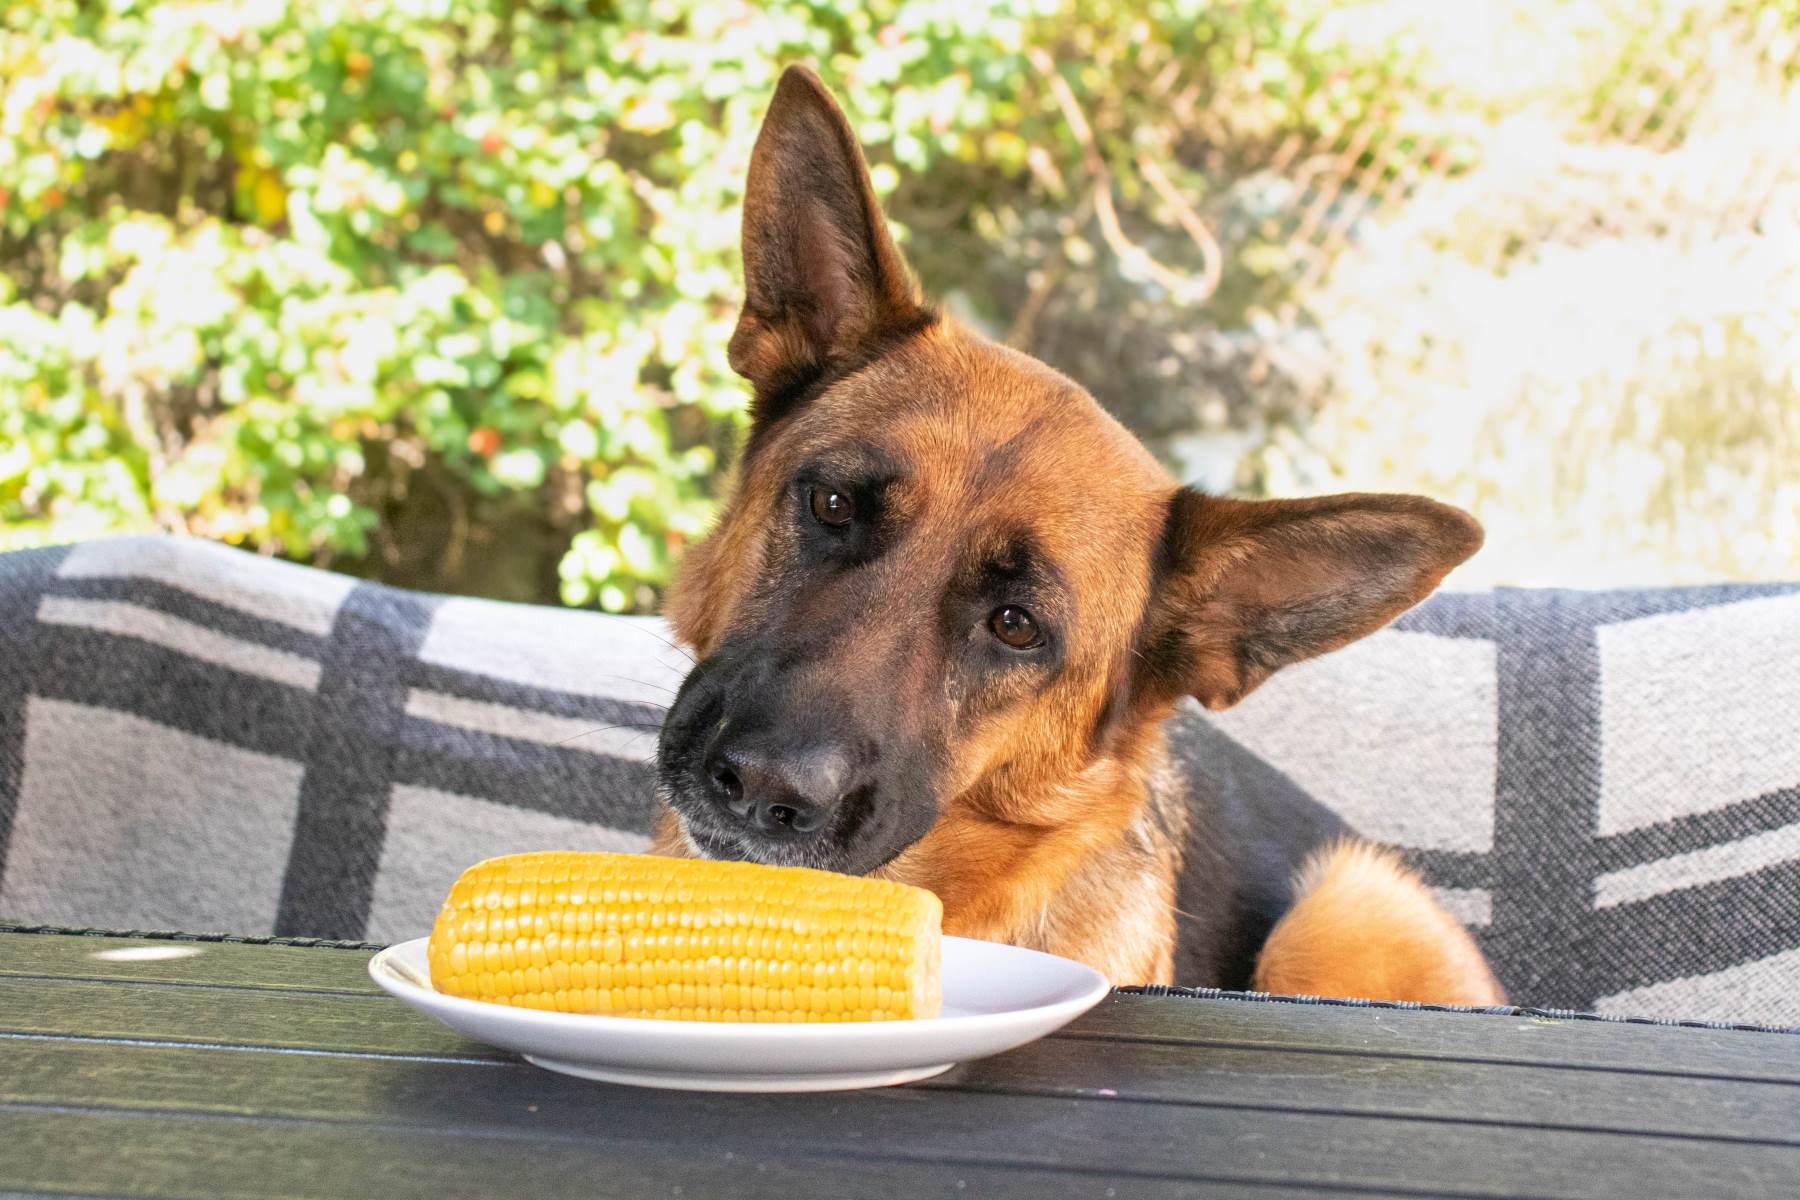 Dog Devours Corn Cob: Should You Panic Or Stay Calm?